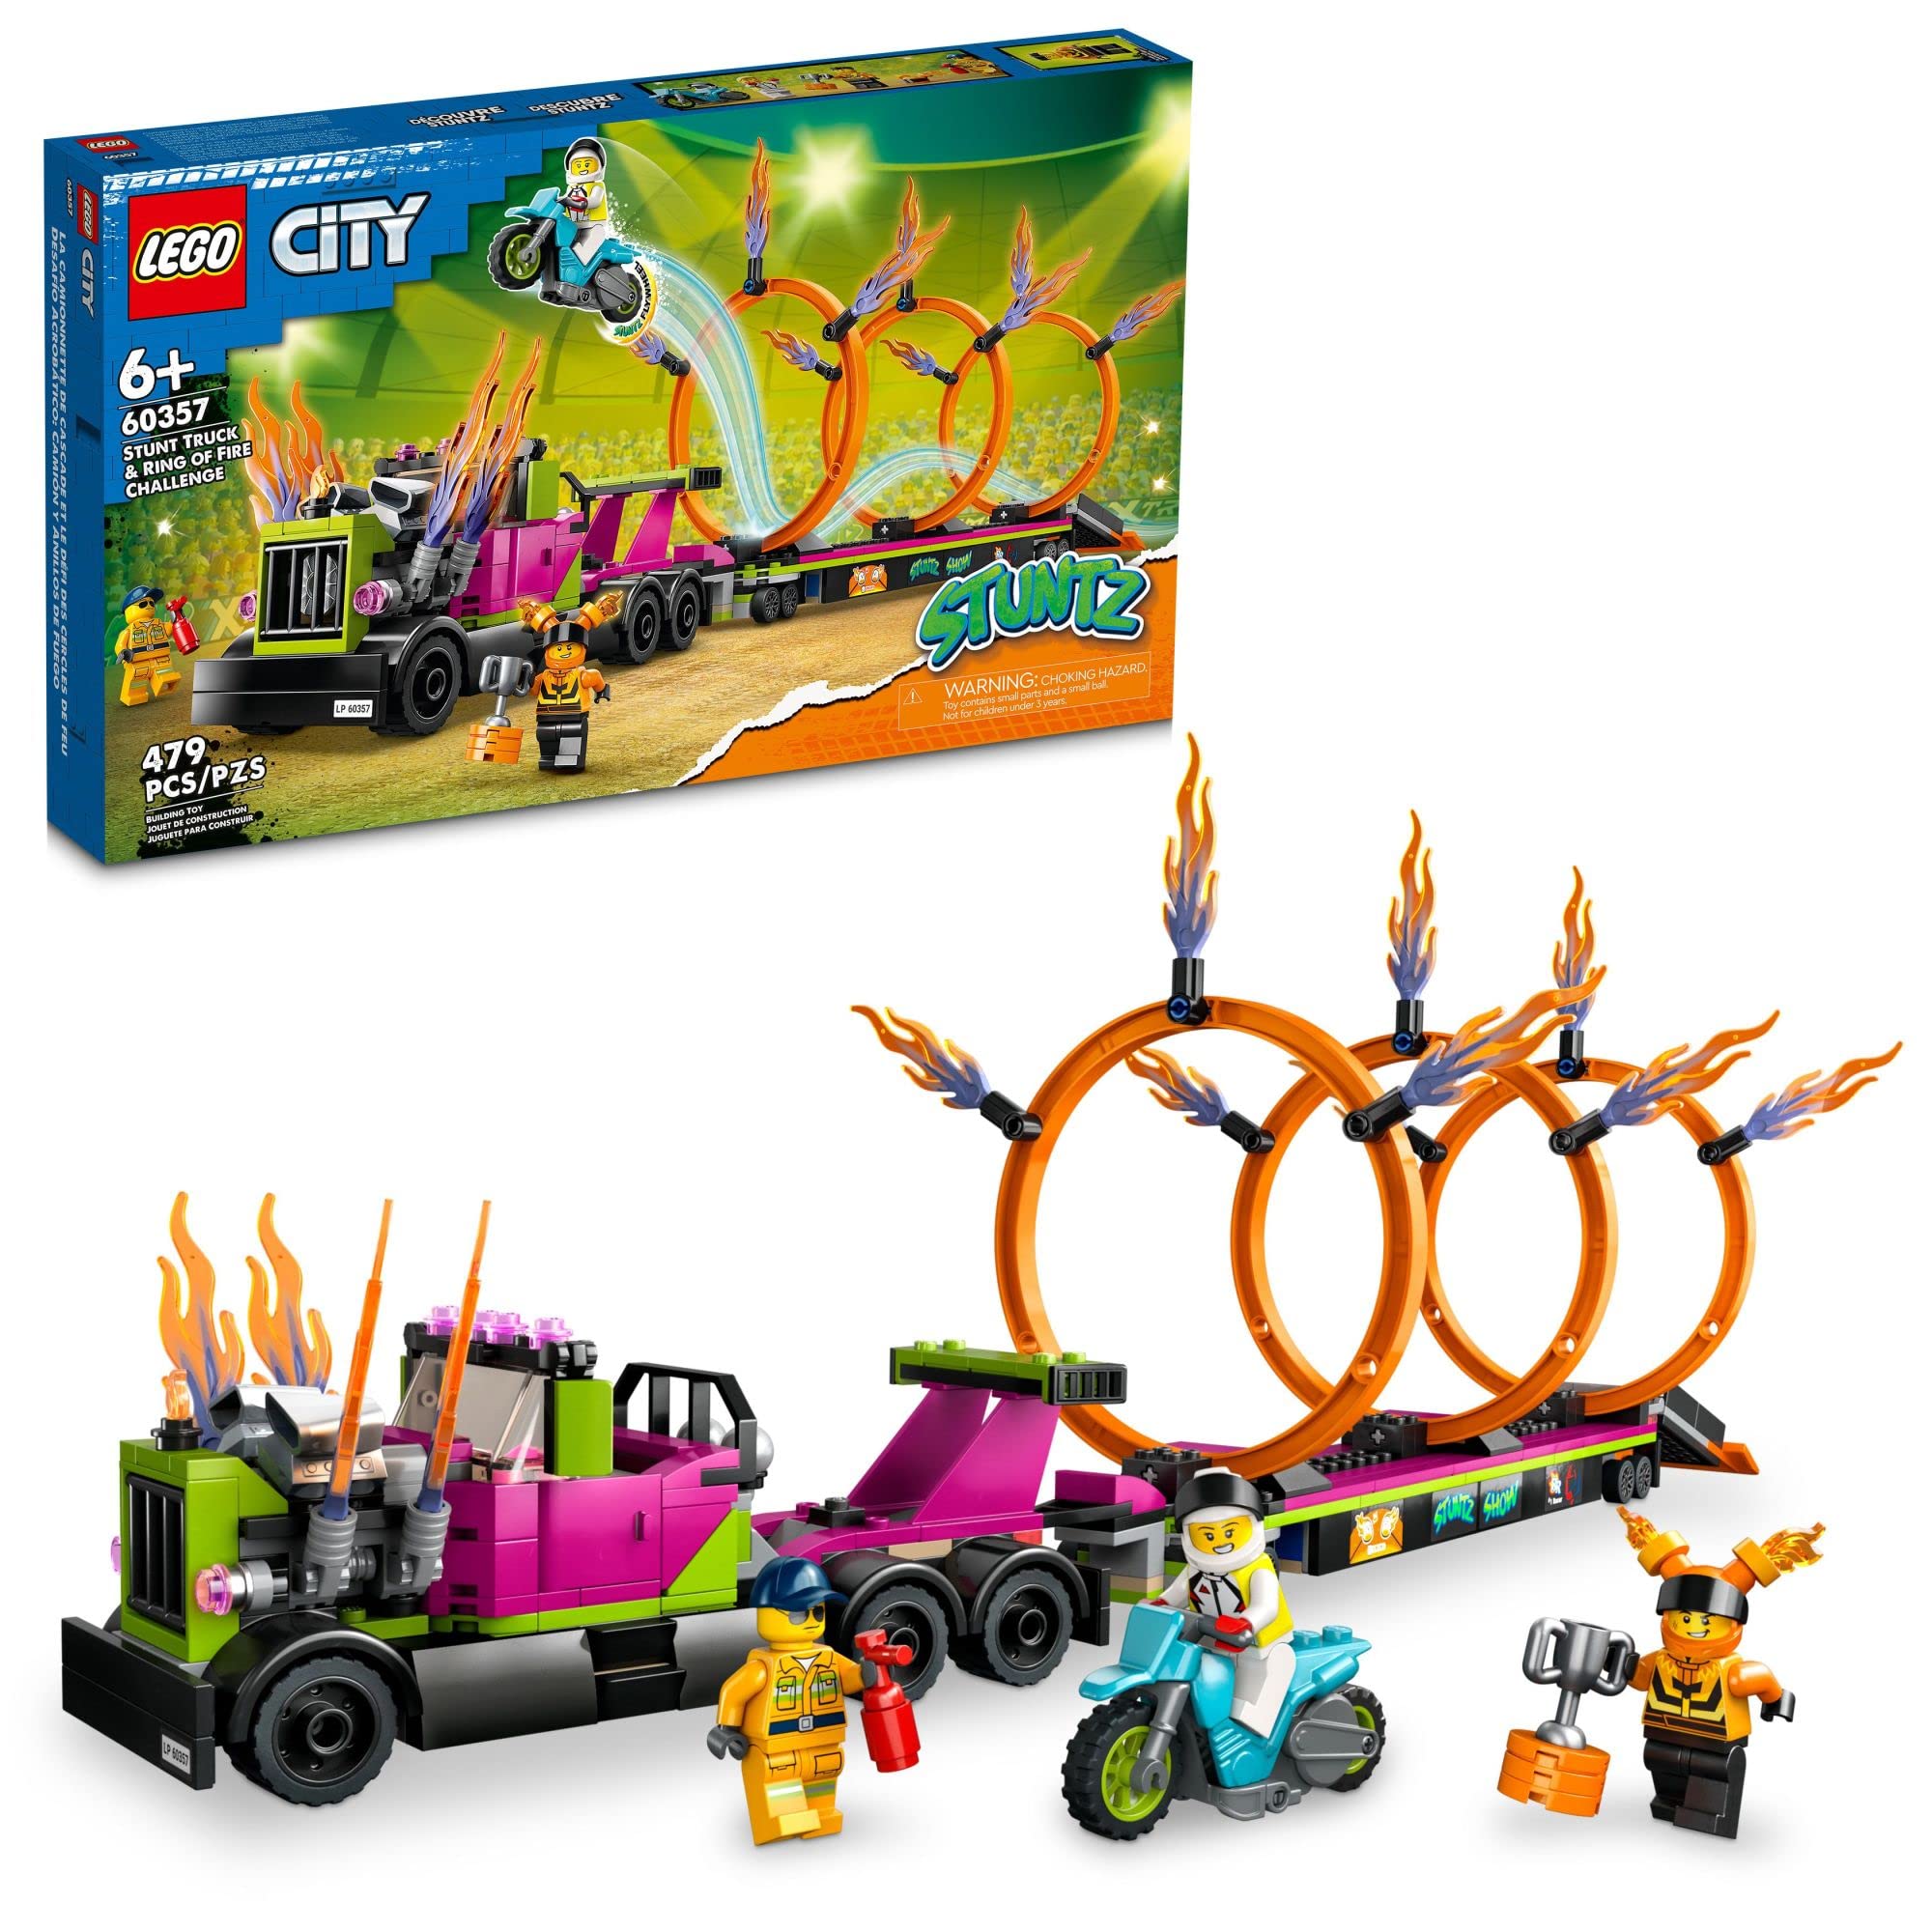 LEGO City Stuntz Stunt Truck & Ring of Fire Challenge w/ Flywheel-Powered Motorcycle Toy & Minifigures $42 + Free Shipping